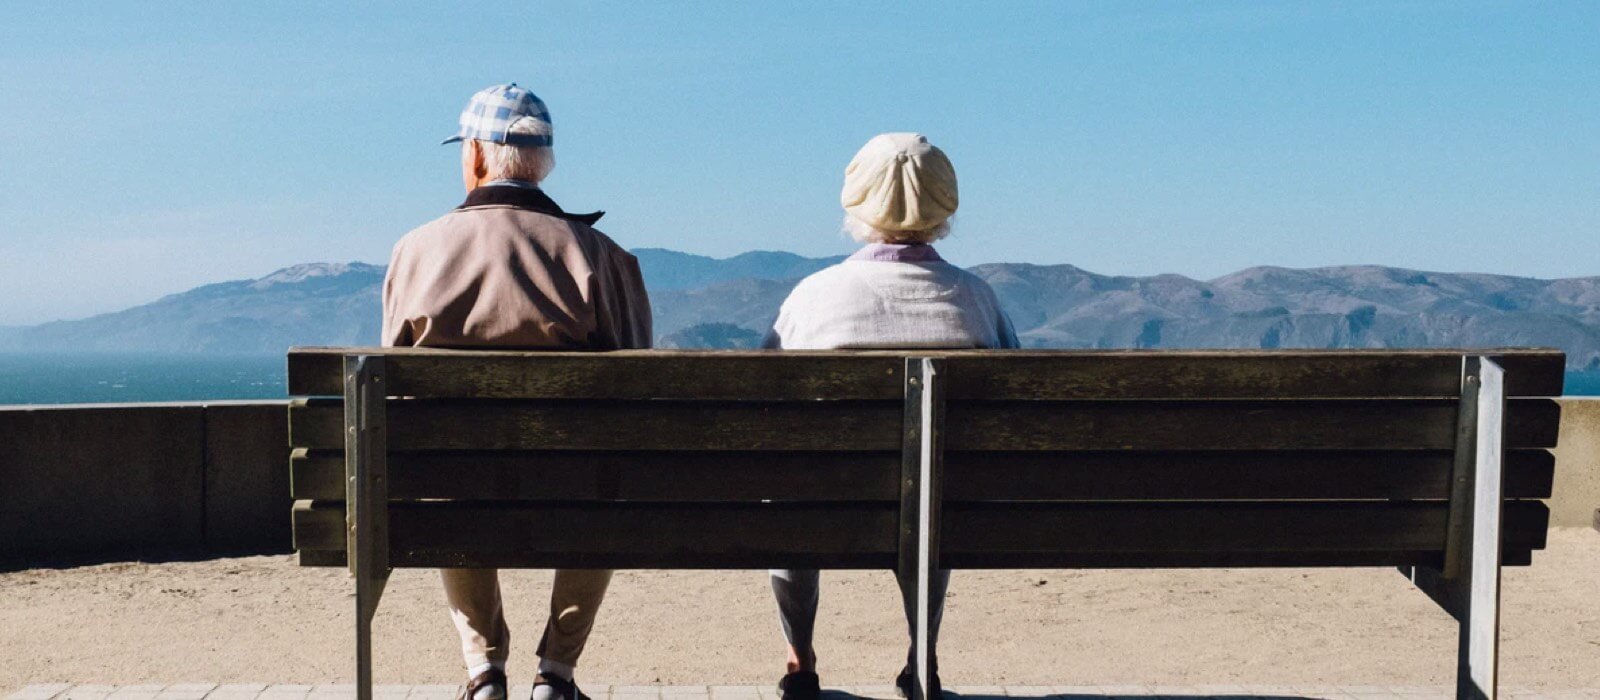 Babel Social Security and Employment Social Security. An elderly couple sitting on a bench looking at the horizon